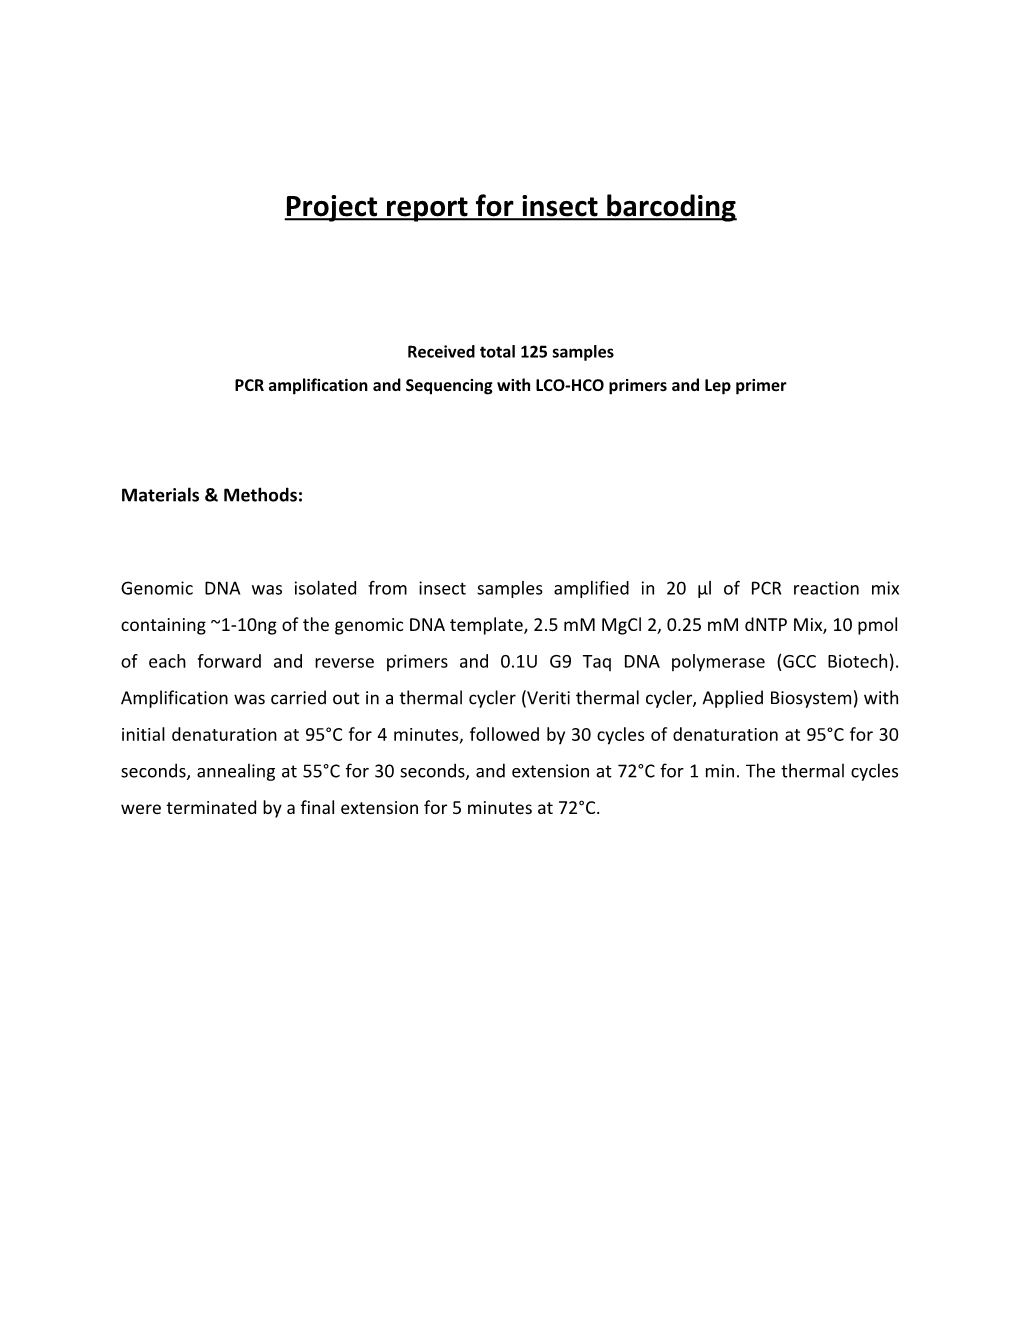 Project Report for Insect Barcoding